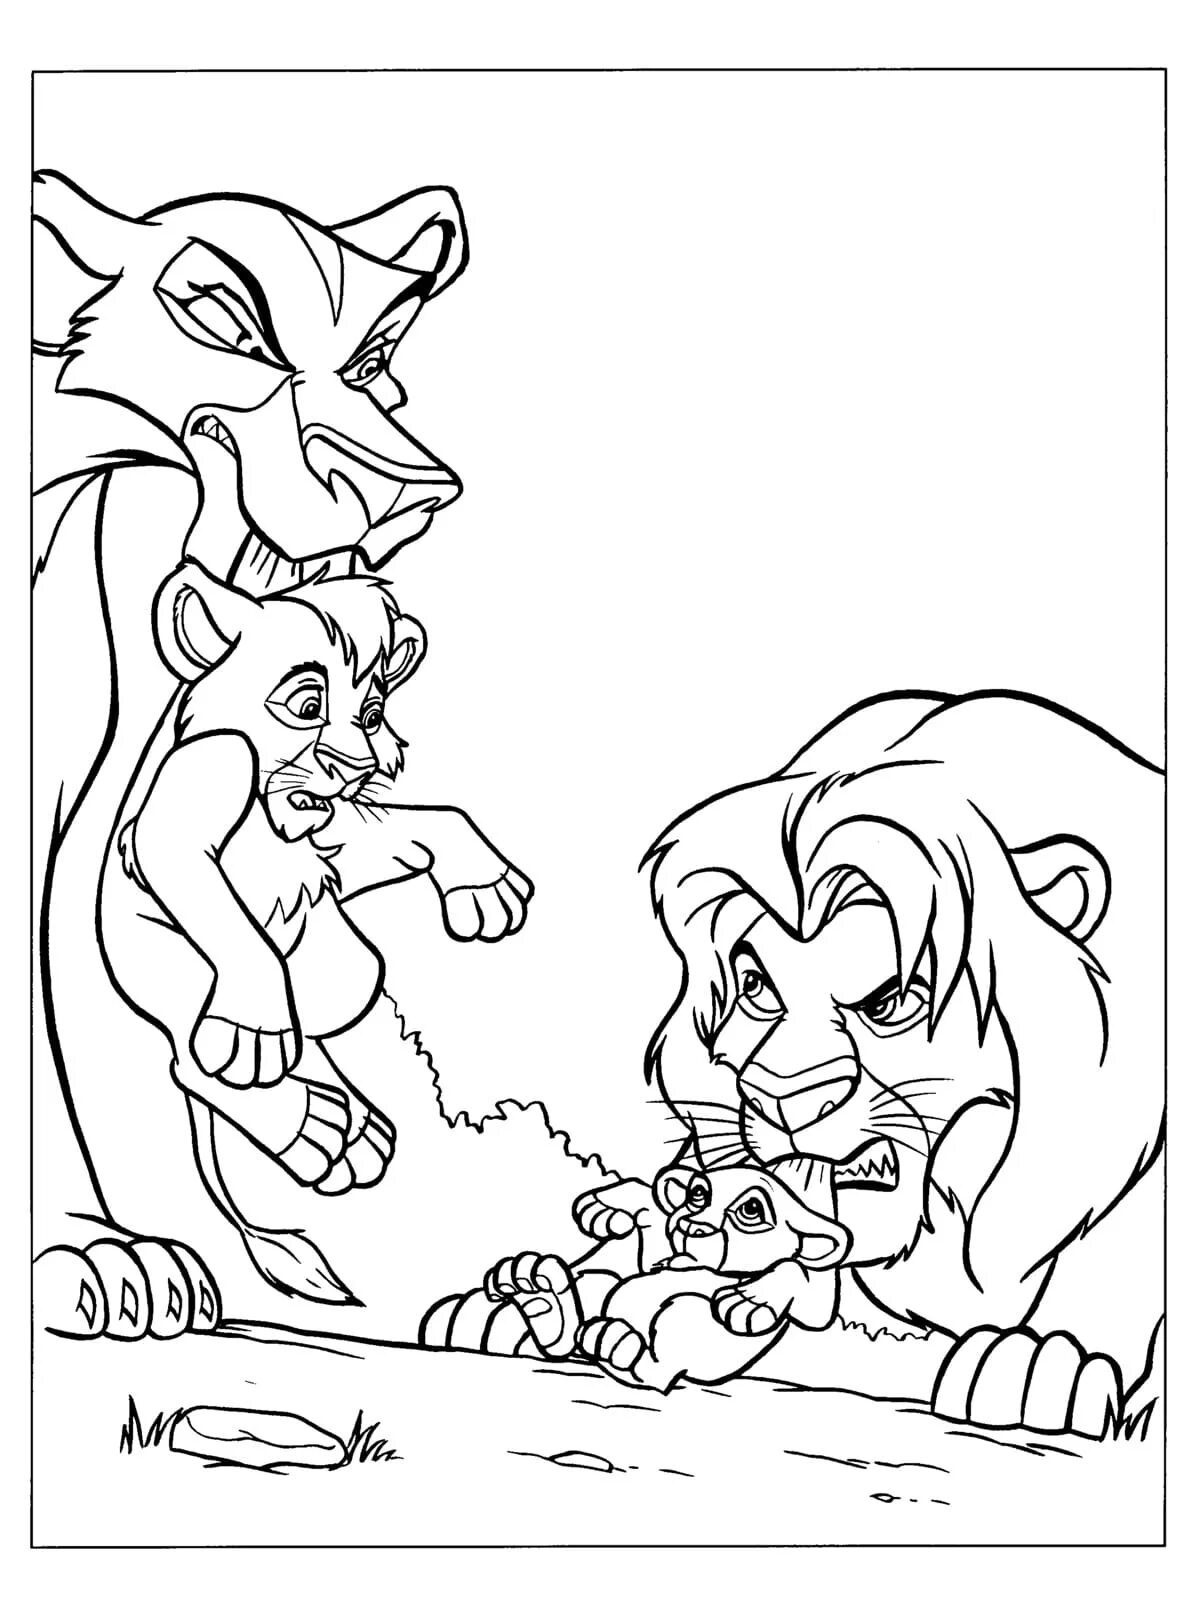 Inviting lion king coloring book for kids